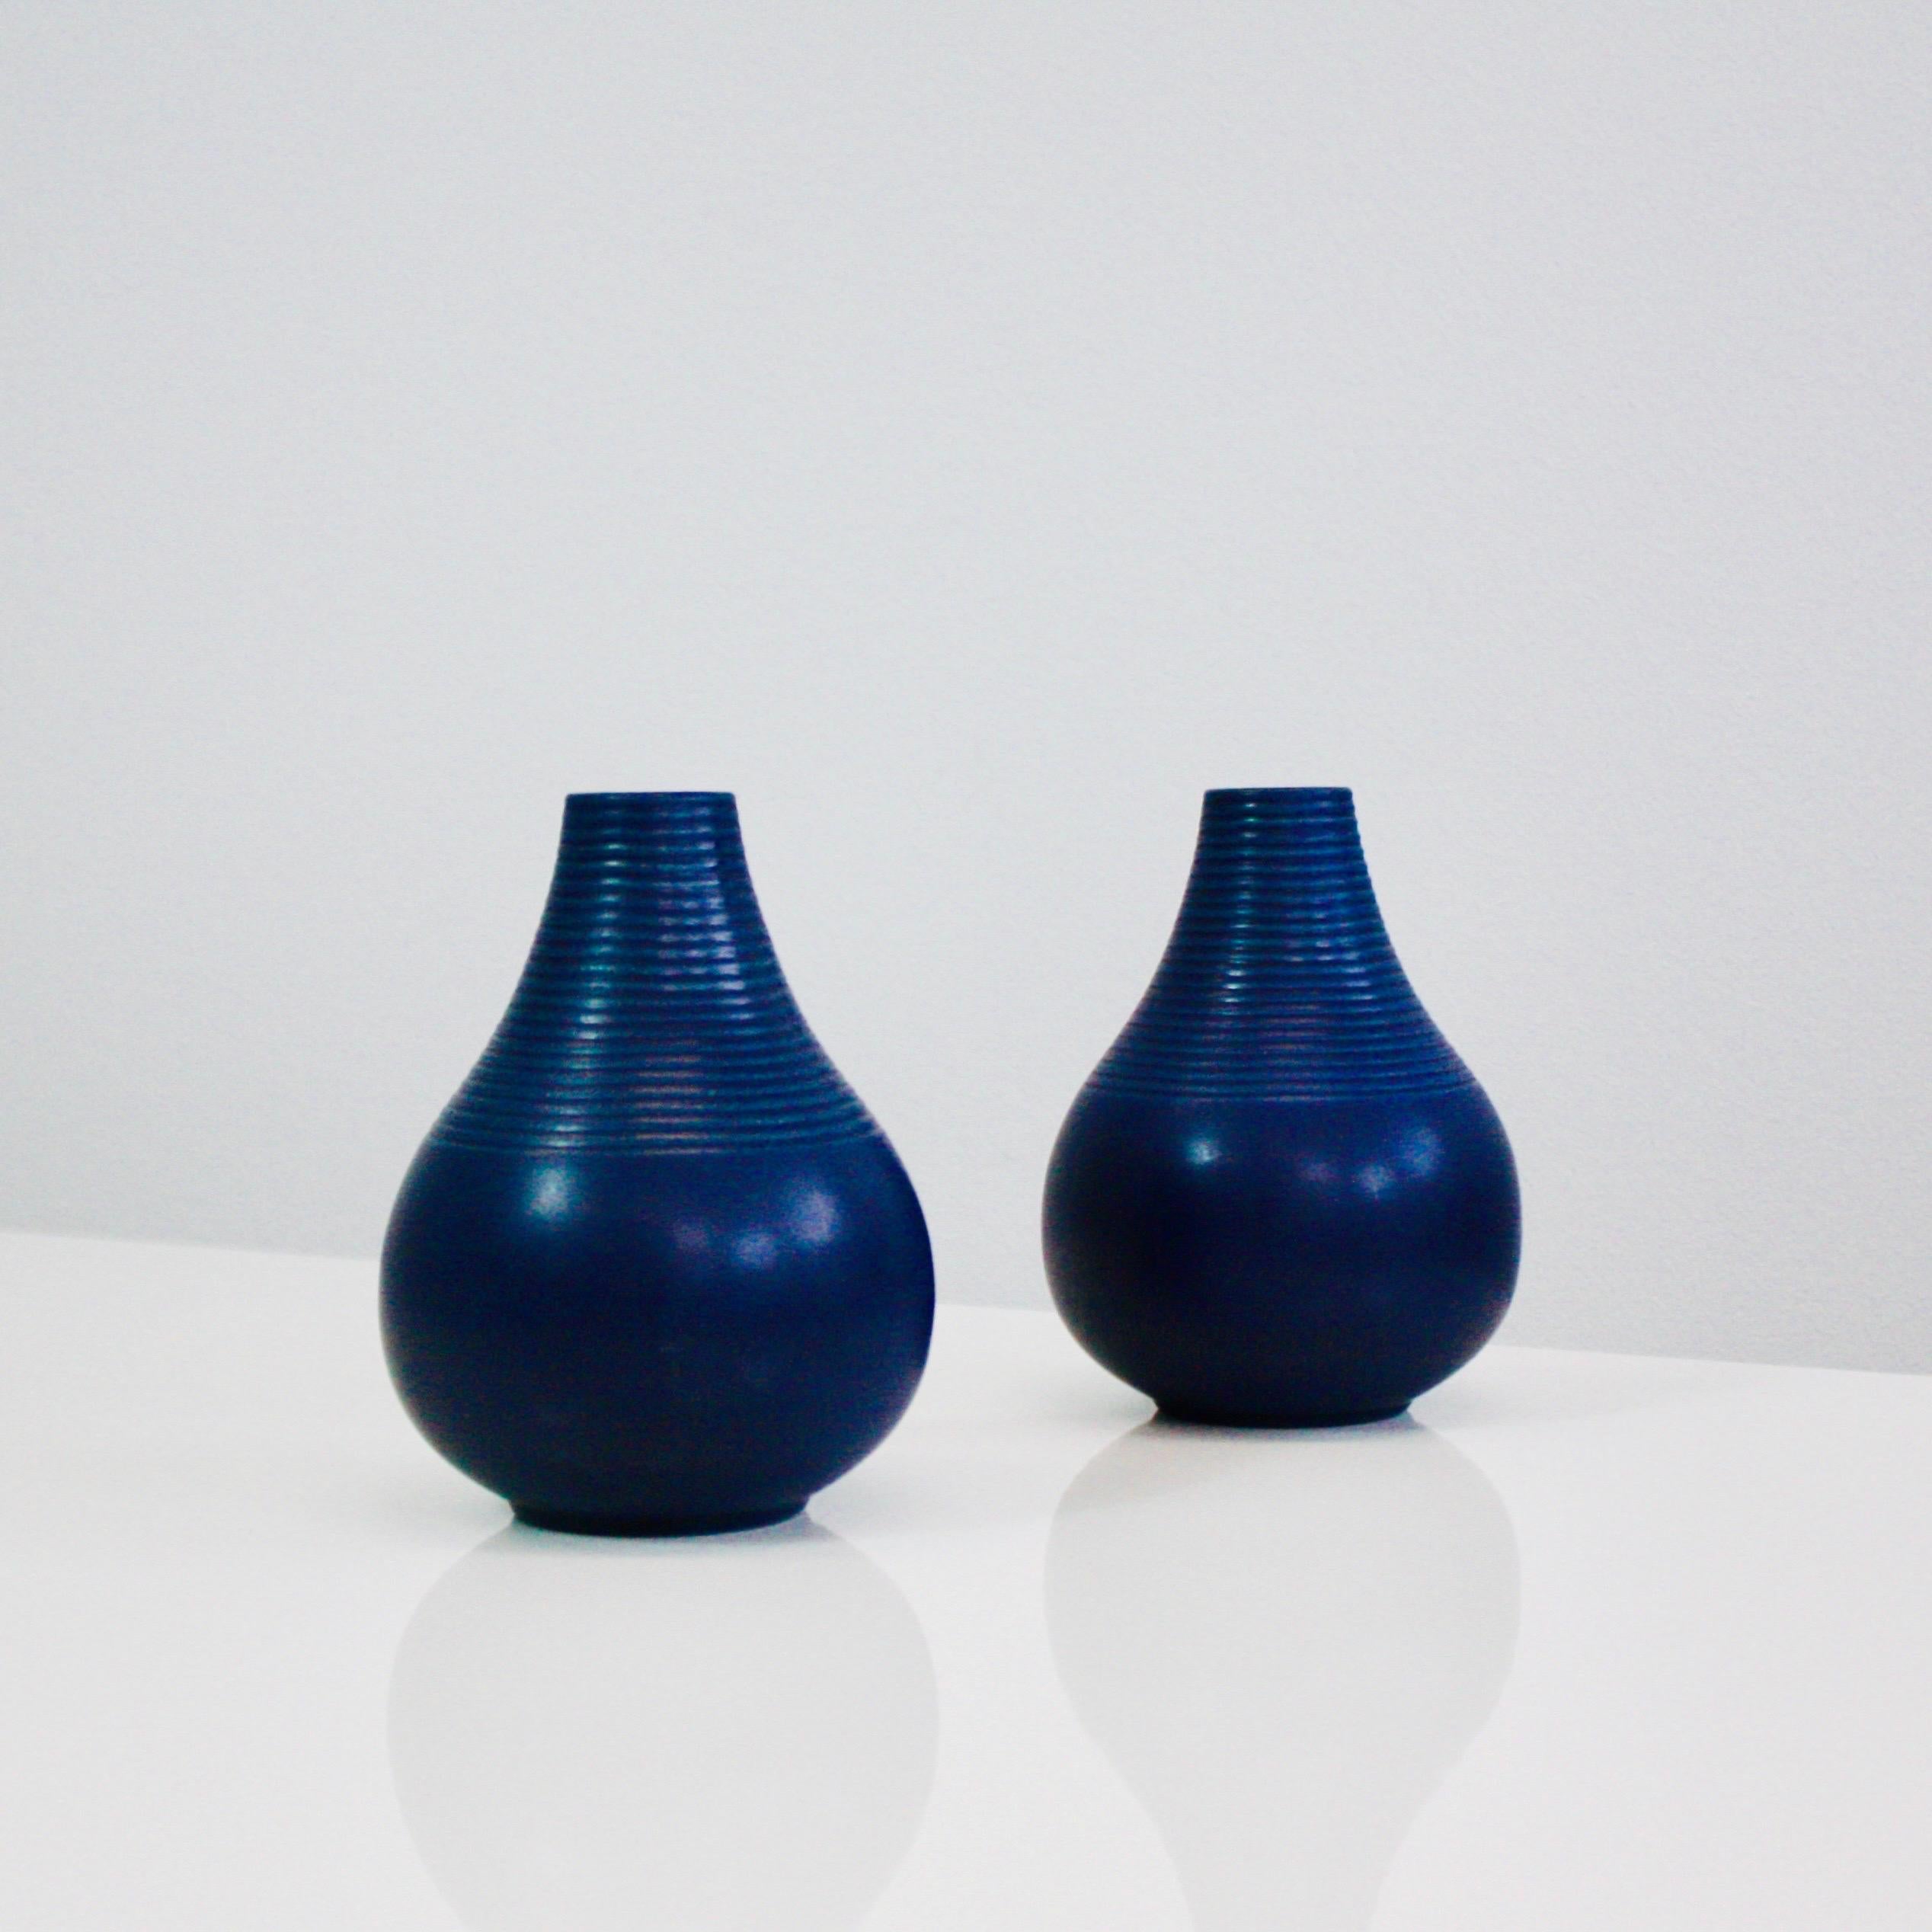 A rare set of blue drop-shaped stoneware vases with horizontal lines designed by Axel Sørensen in 1941 for P. Ipsense Enke. An irresistible set for any beautiful space. 

* Set (2) of blue drop-shaped stoneware vases with horizontal lines 
*